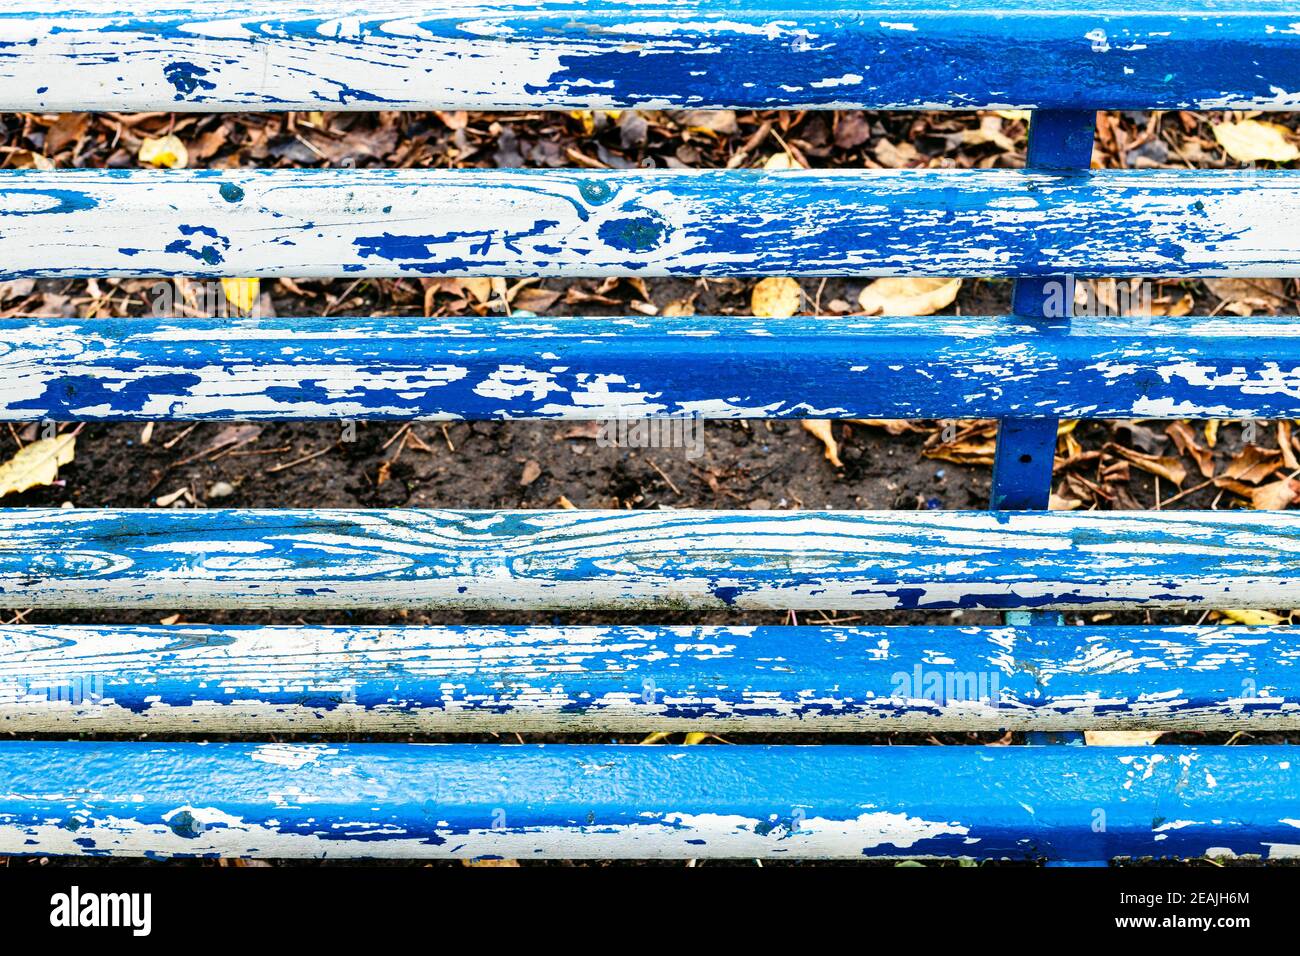 shabby planks of blue and white wooden bench Stock Photo